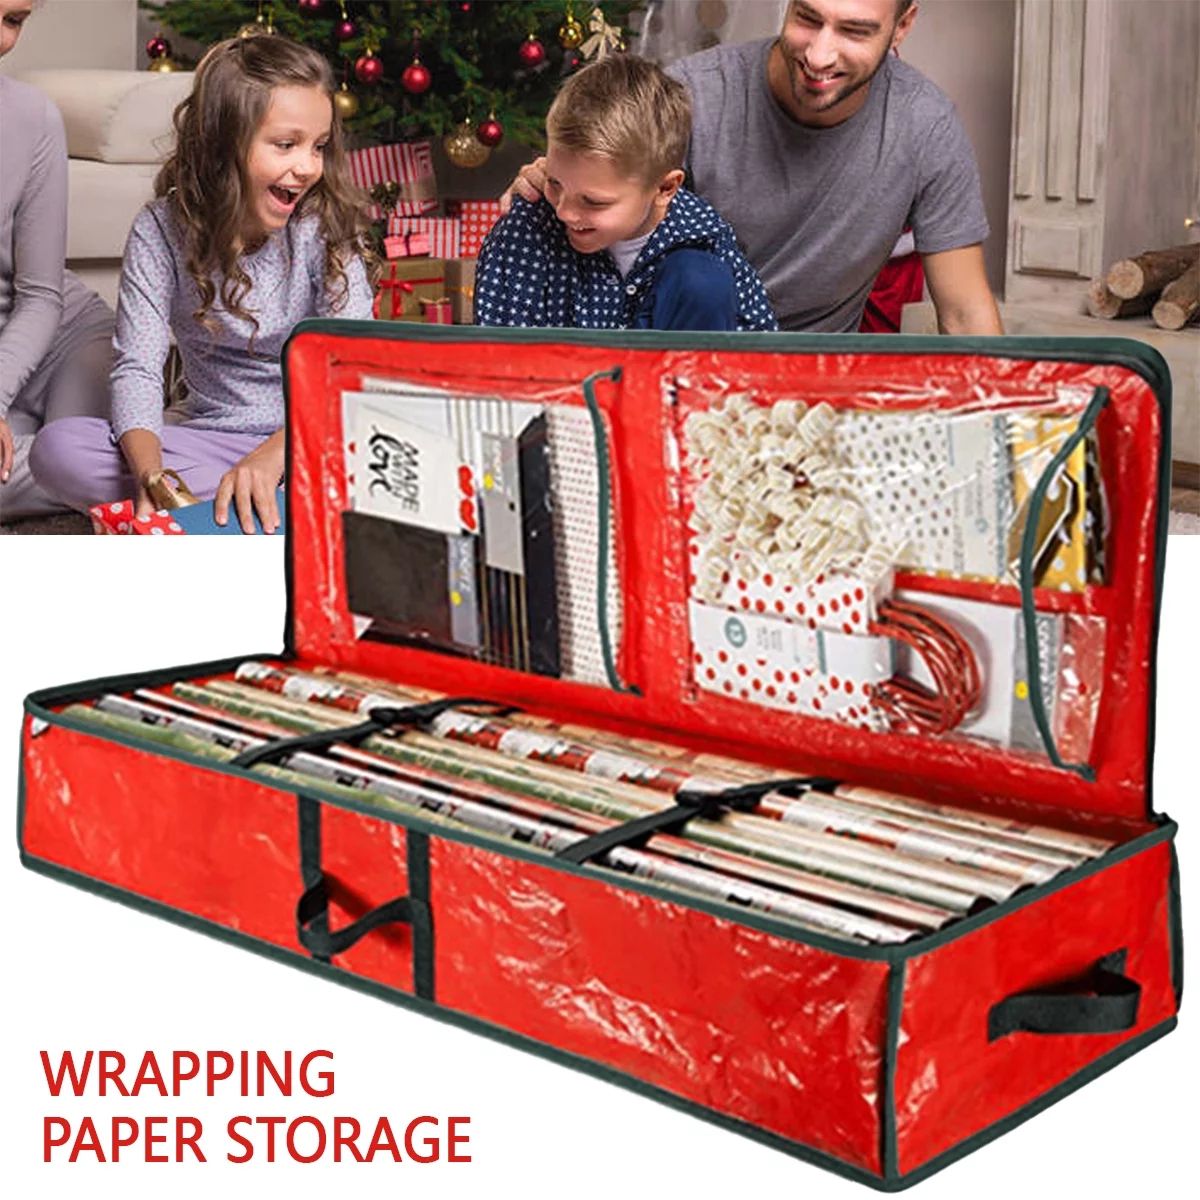 Jetcloudlive Wrapping Paper Storage Bag Containers for Christmas Gift, Waterproof Underbed Organi... | Walmart (US)